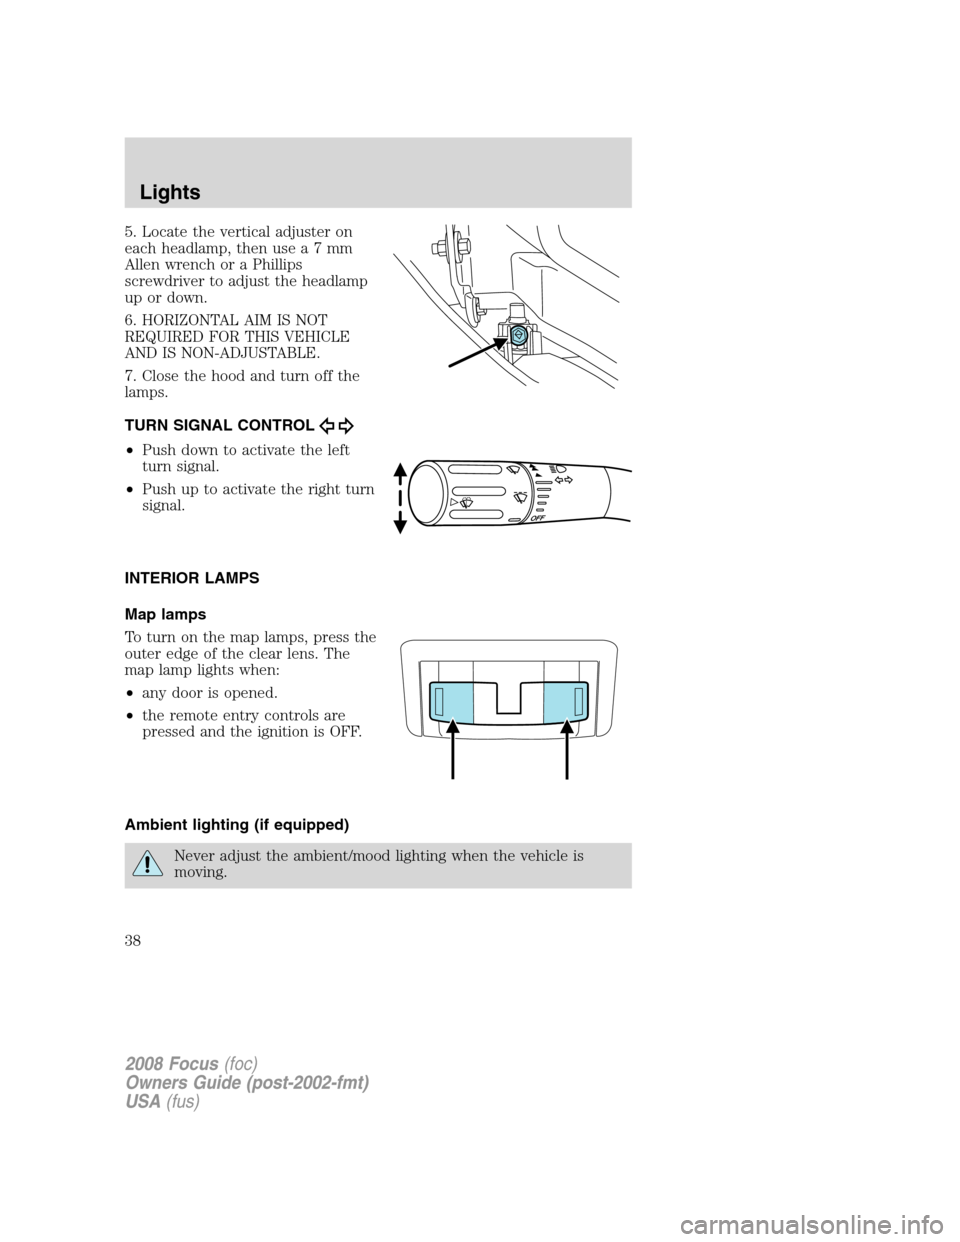 FORD FOCUS 2008 2.G Owners Manual 5. Locate the vertical adjuster on
each headlamp, then usea7mm
Allen wrench or a Phillips
screwdriver to adjust the headlamp
up or down.
6. HORIZONTAL AIM IS NOT
REQUIRED FOR THIS VEHICLE
AND IS NON-A